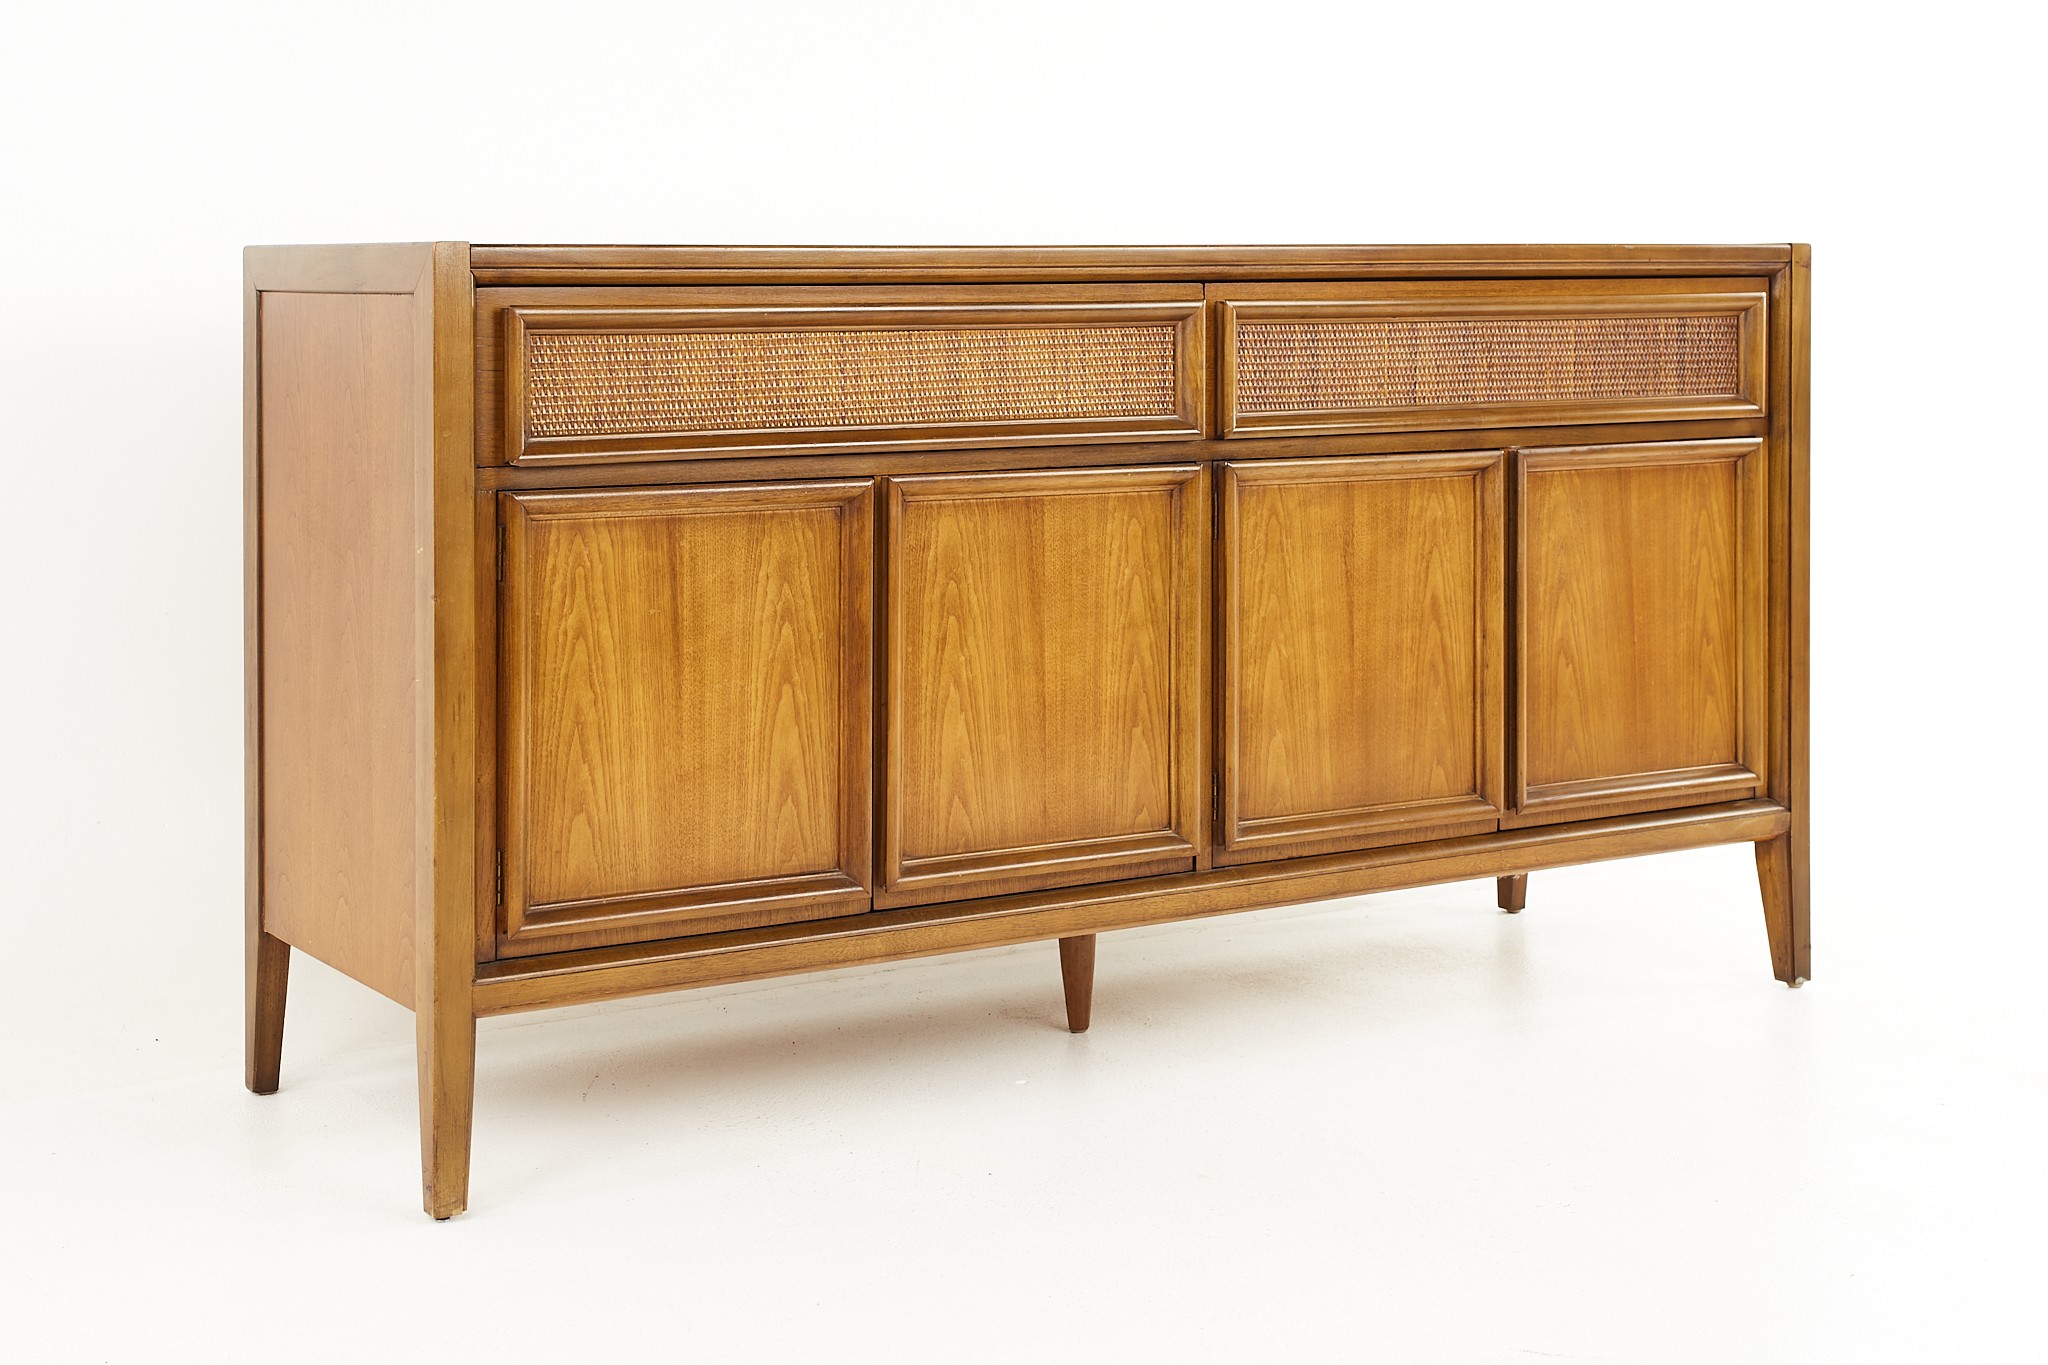 Founders Style Mid Century Walnut Basket Woven Front Credenza Buffet